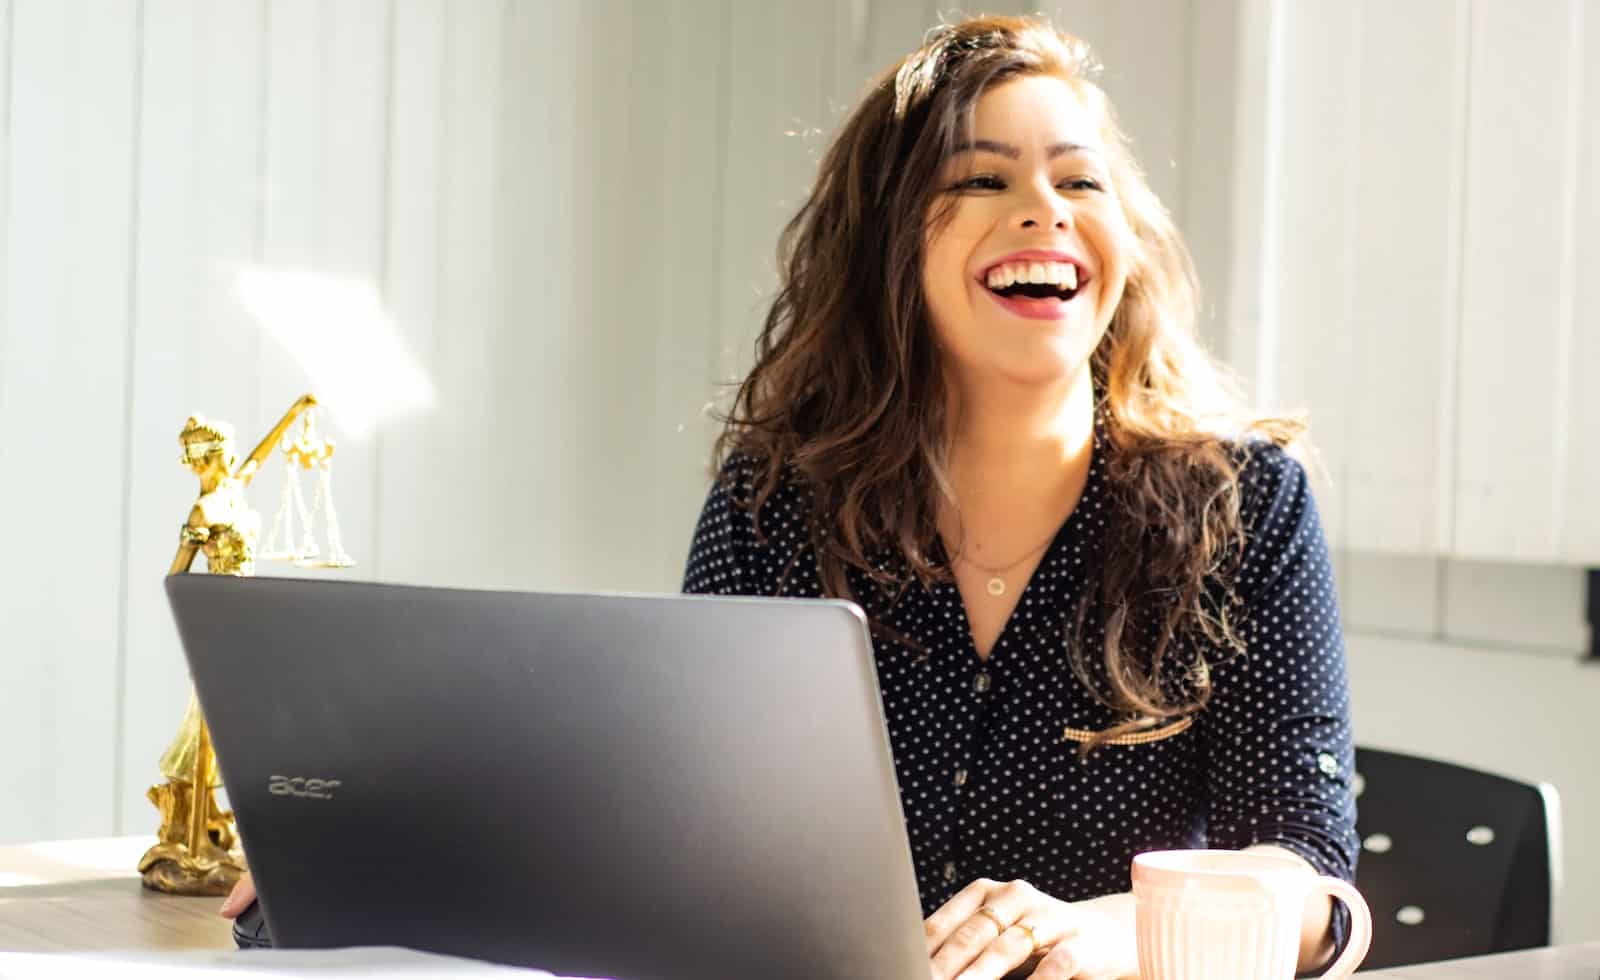 woman sitting at laptop laughing thanks for freedom of starting her own online subscription business